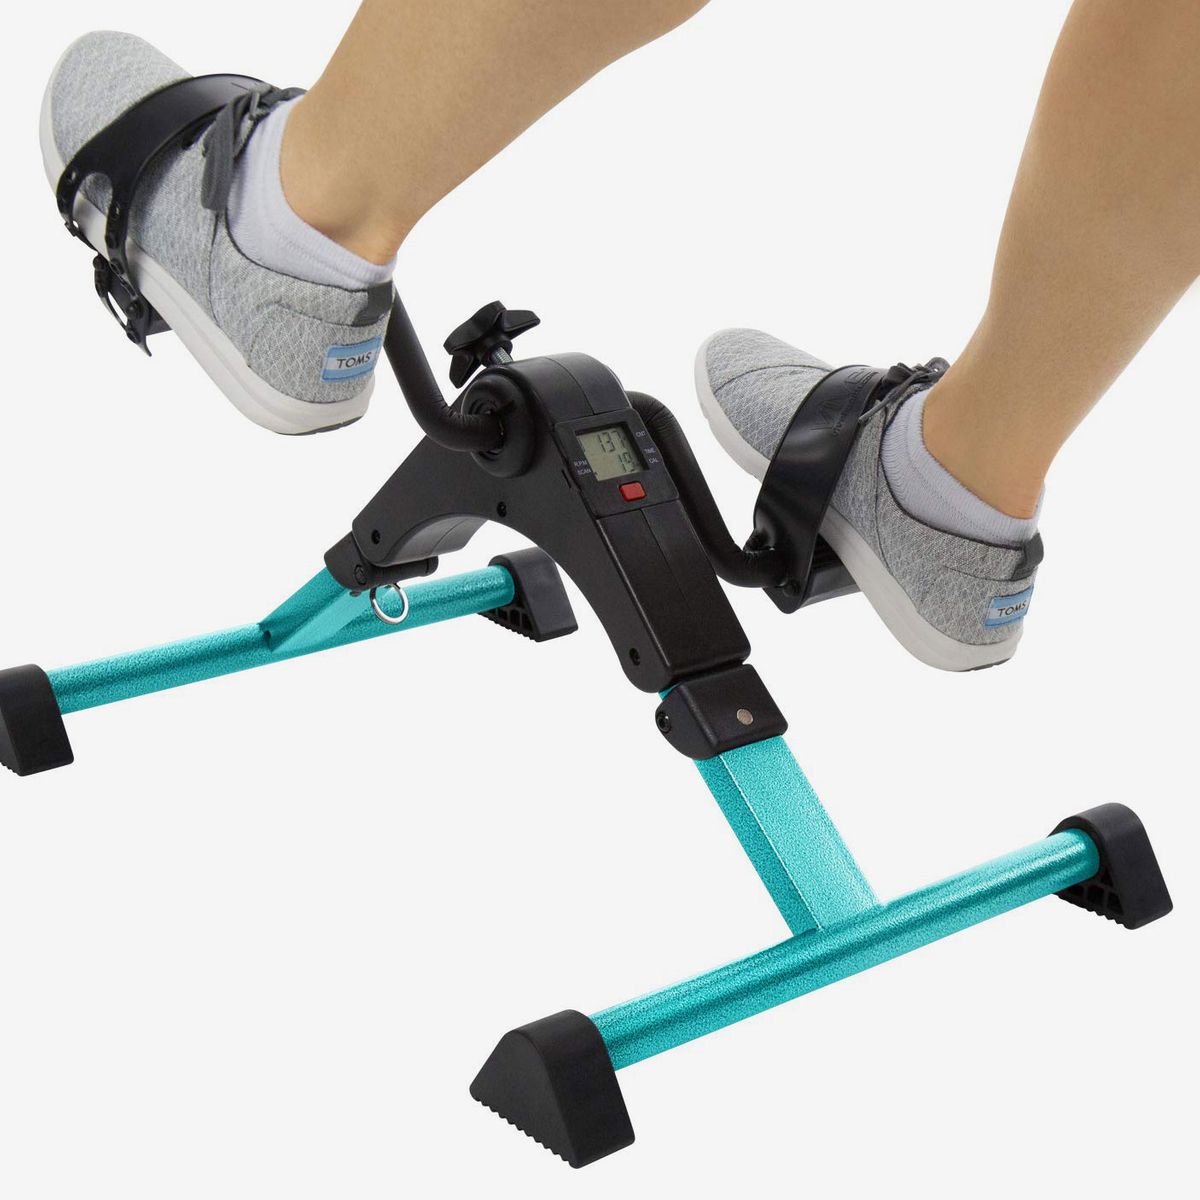 pedal only exercise bike